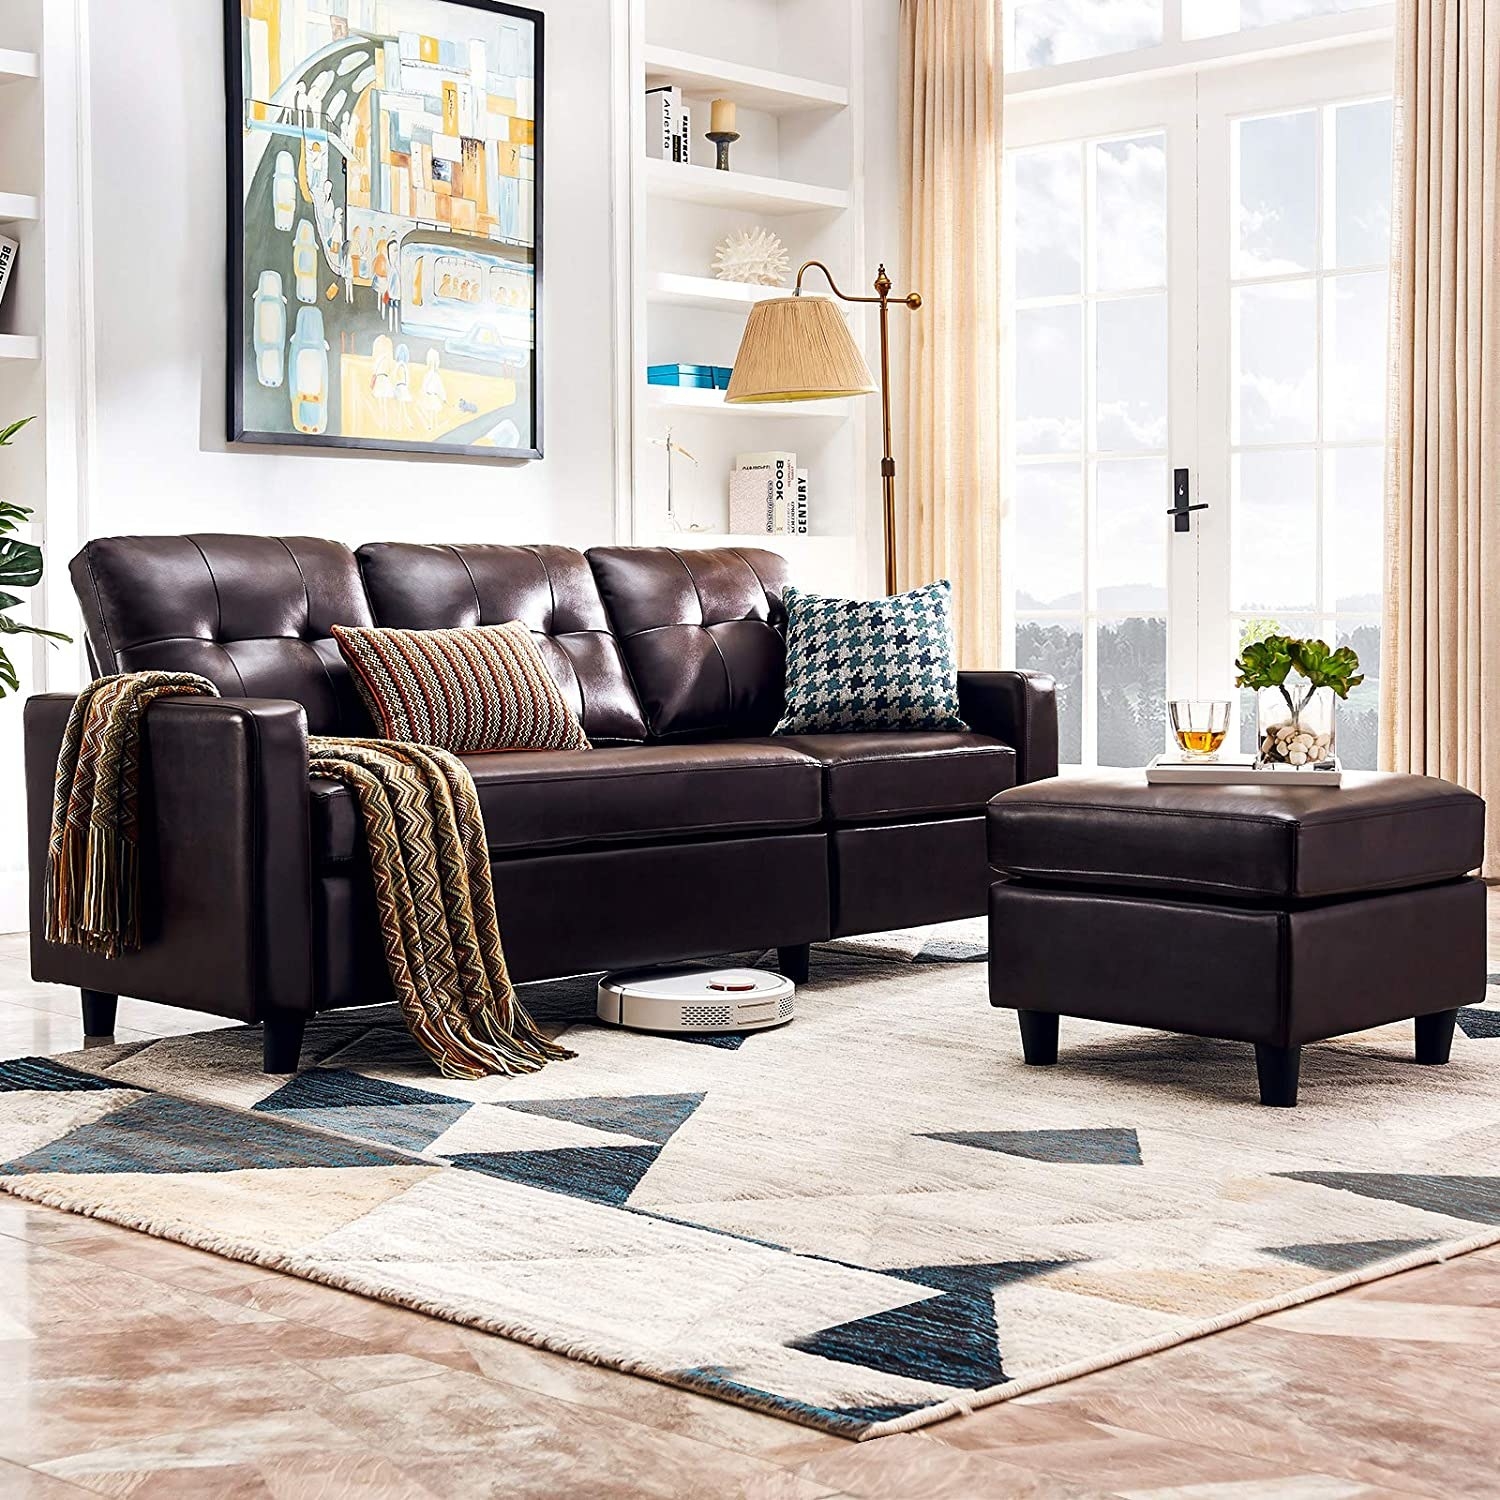 brown faux leather sectional with ottoman separated